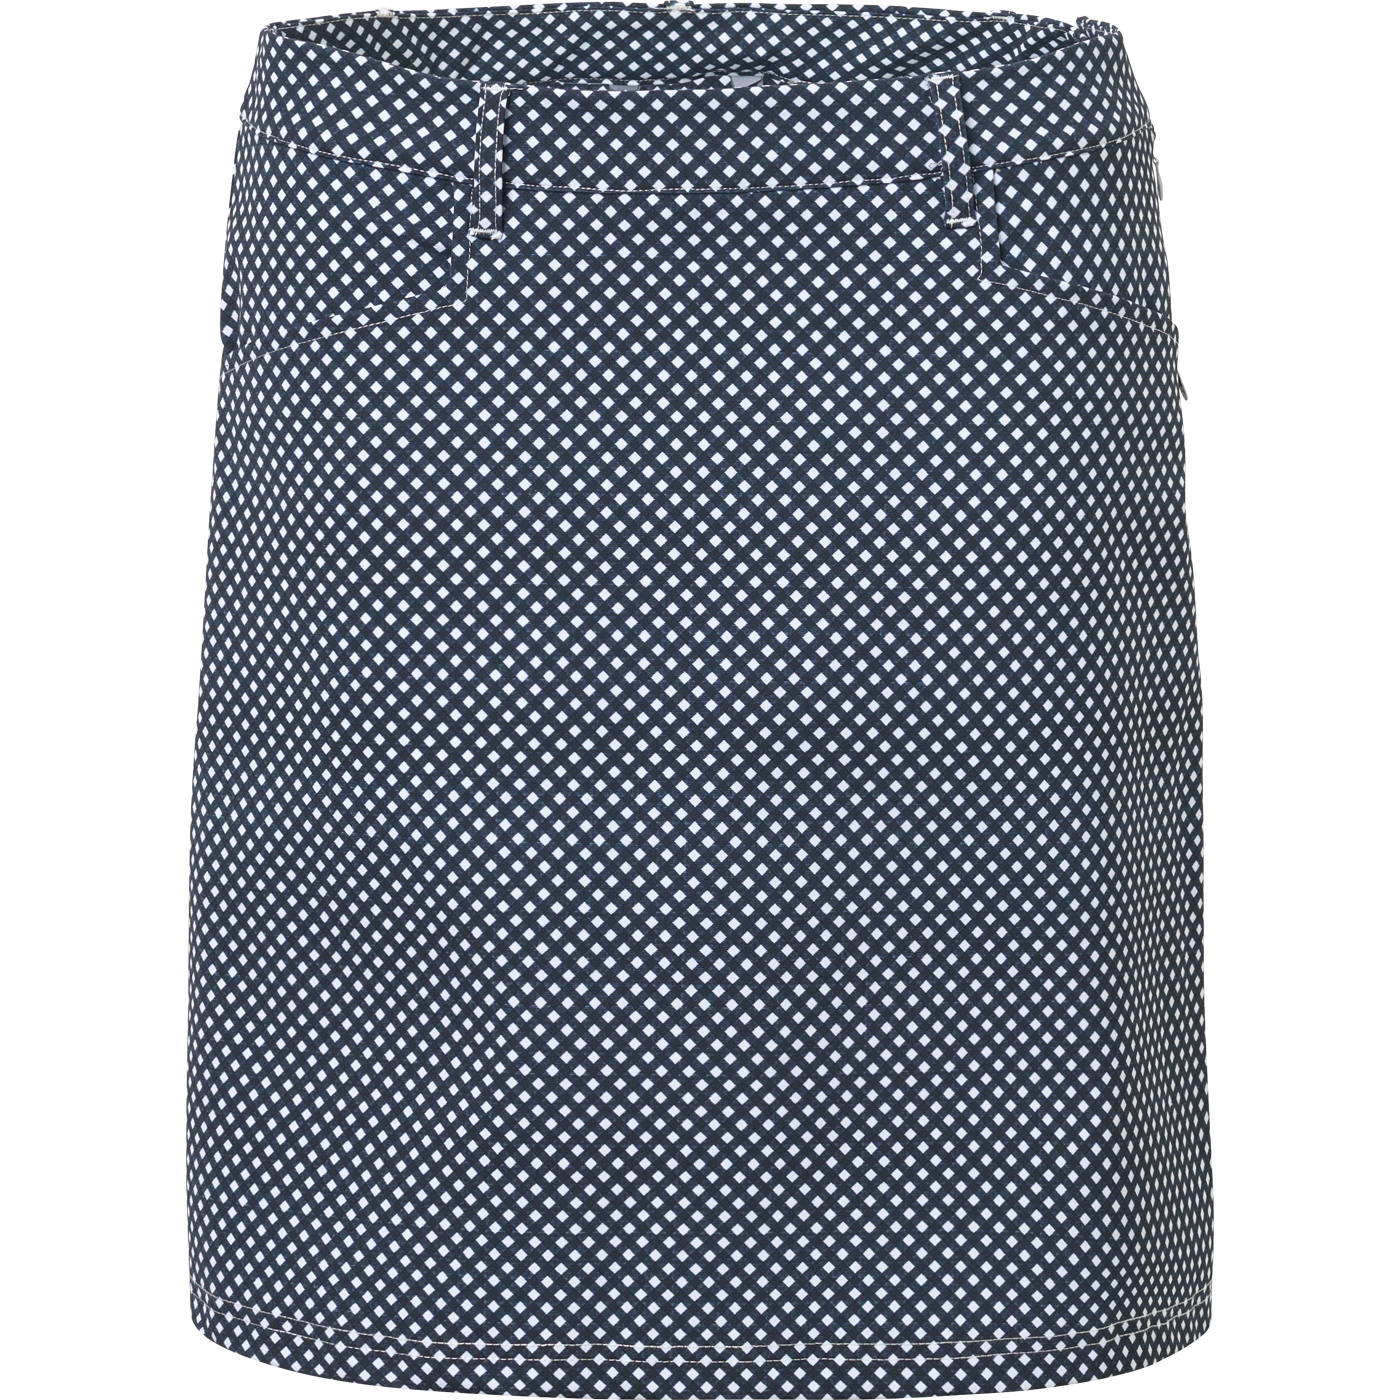 Lds Merion skort 45cm - navy check in the group WOMEN / All clothing at Abacus Sportswear (2983394)